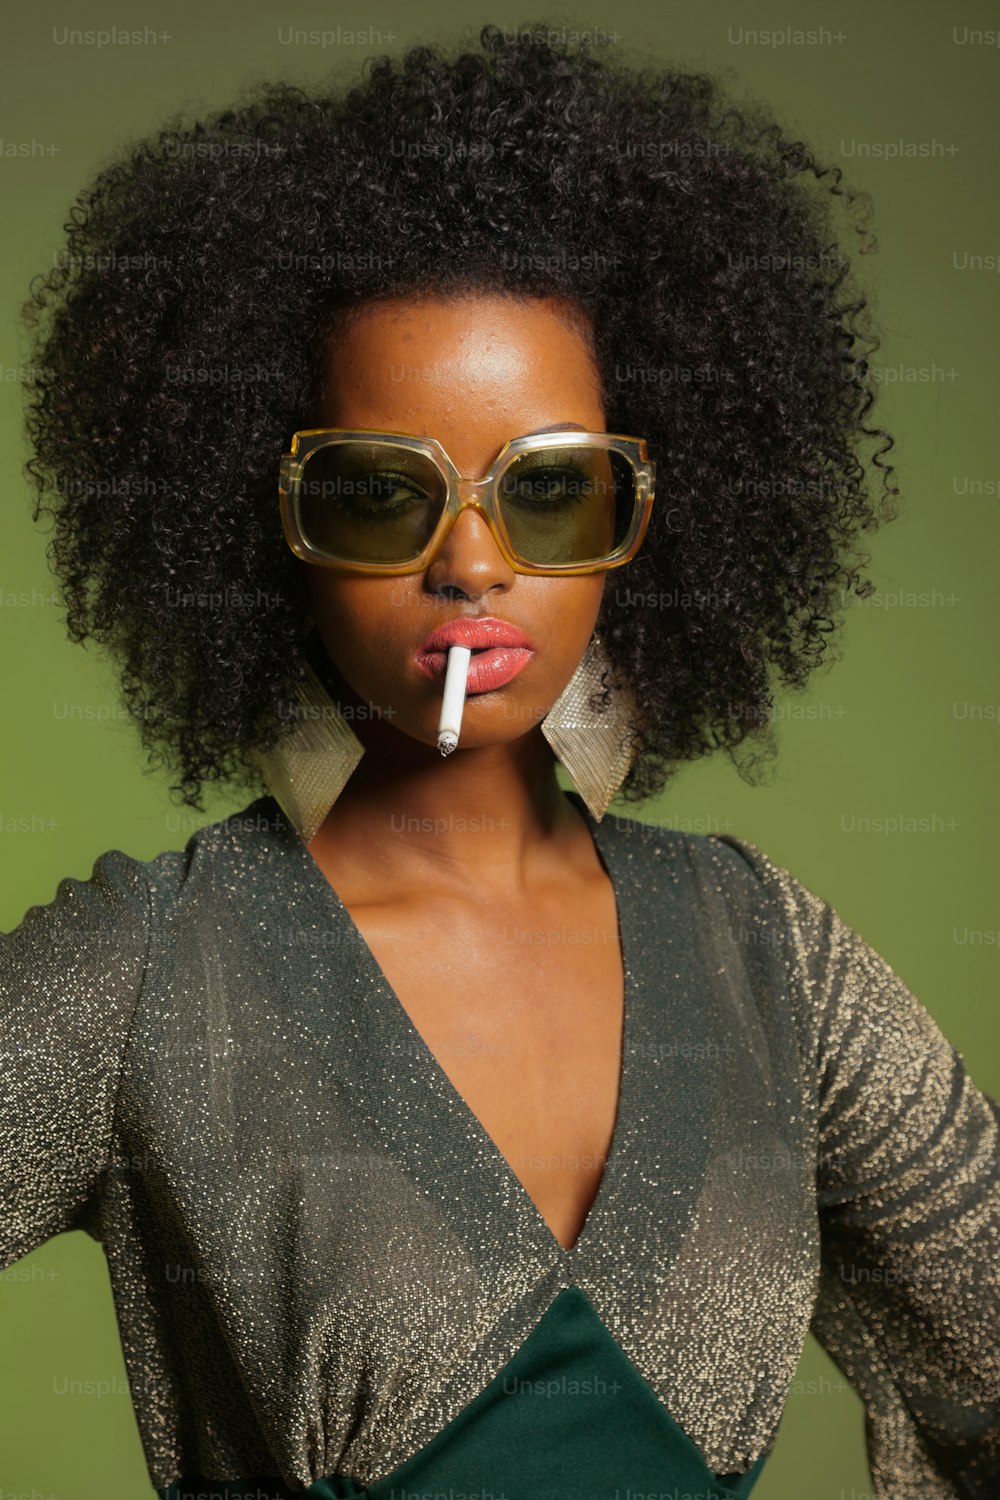 Smoking retro 70s fashion afro woman with green dress and sunglasses. Green background.